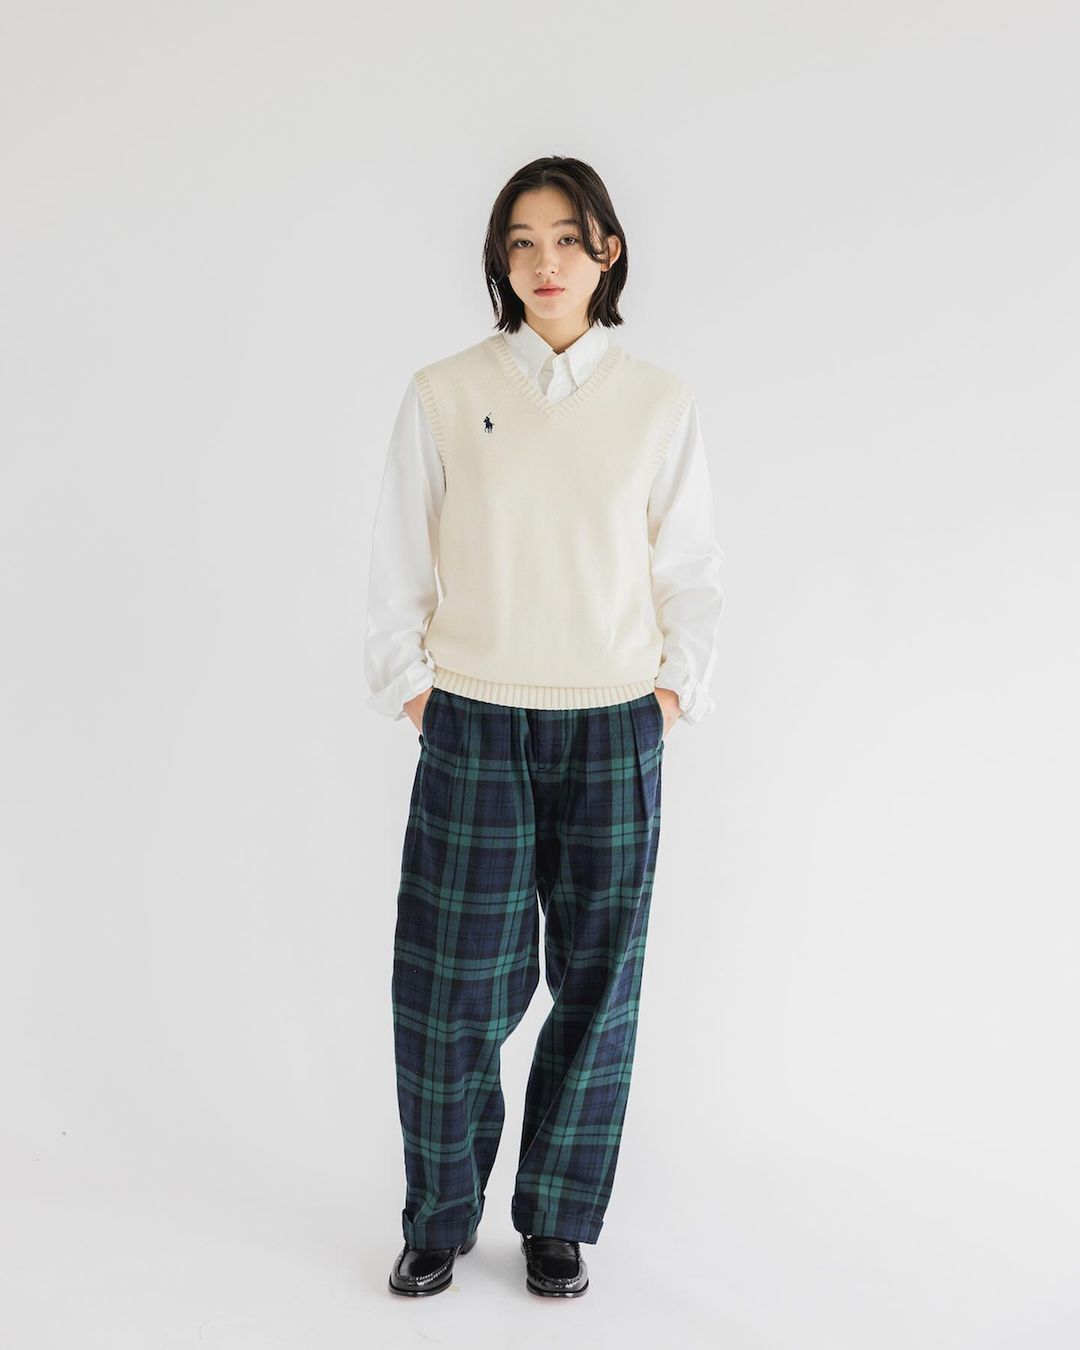 Beams polo ralph lauren collection collaboration automne hiver 2023 aw23 high school student